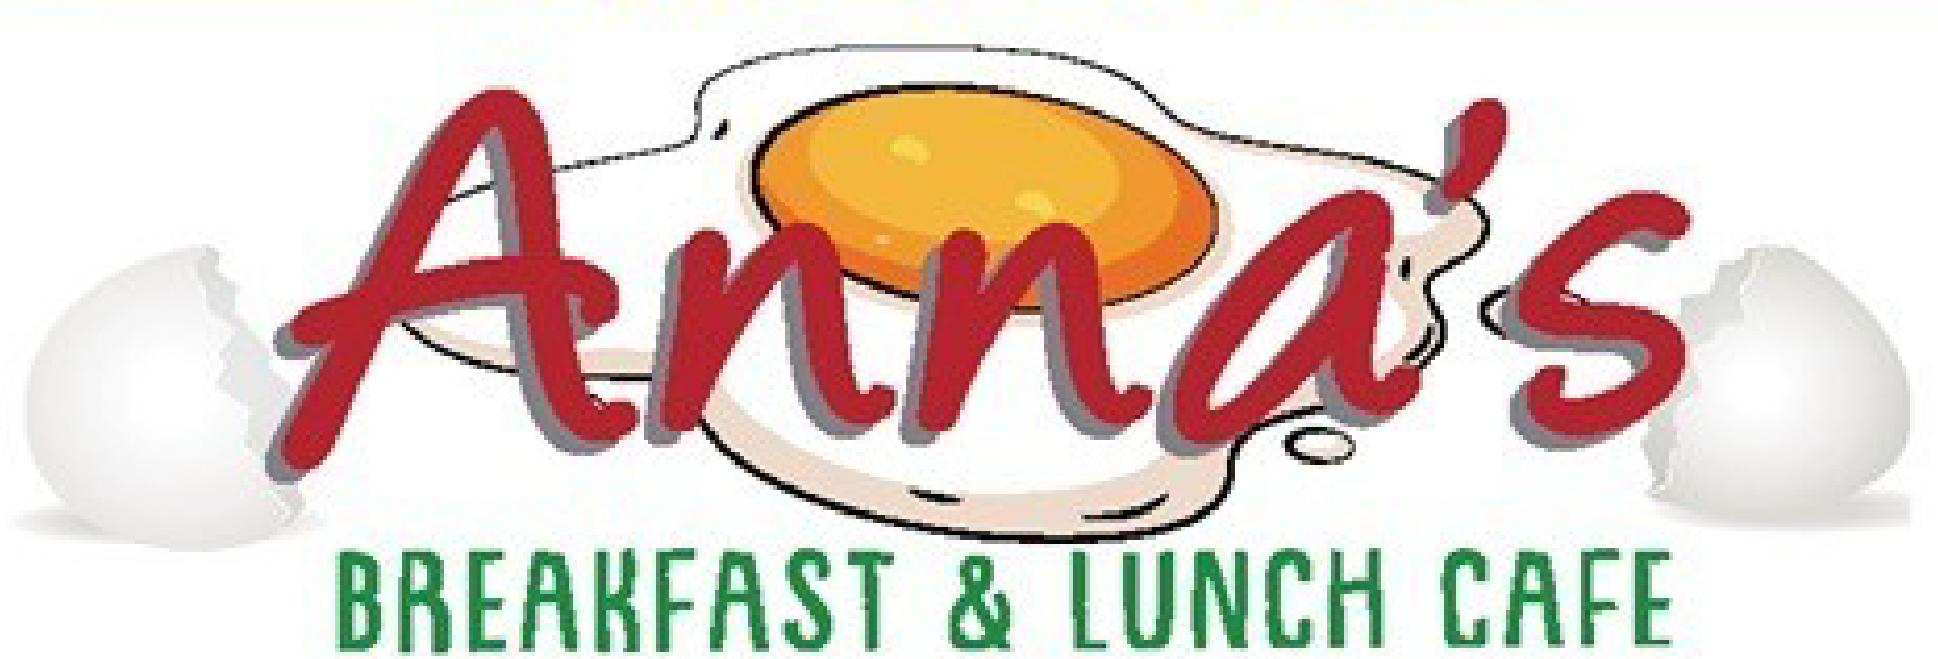 Anna's Breakfast and Lunch Cafe logo top